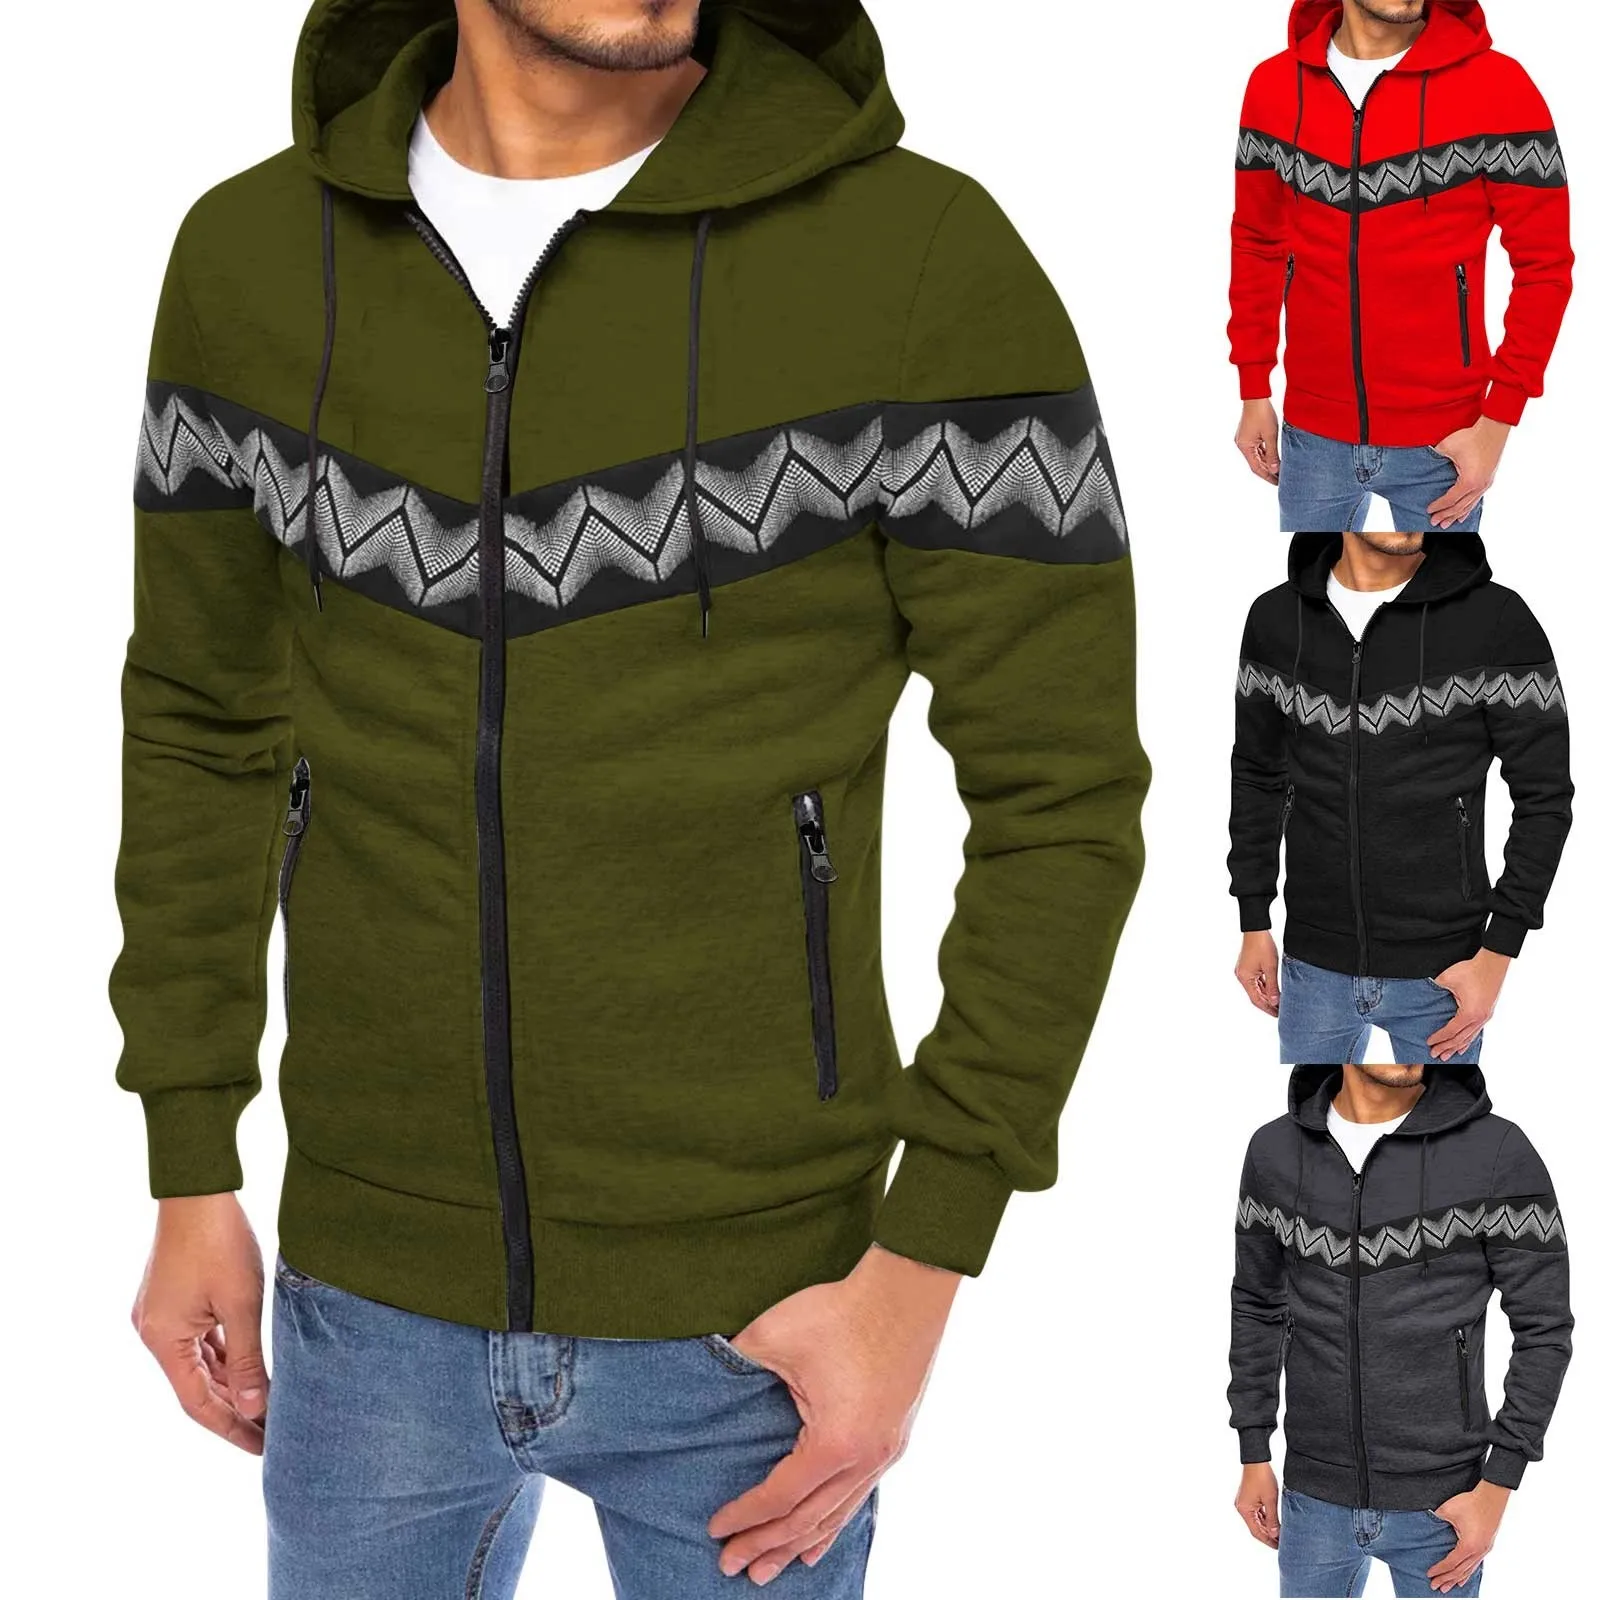 

Fashion Casual Men'S Jackets Tracksuit Solid Long Sleeve Zipper Hooded Outerwears For Male Pockets Hoodies Sweatshirts Clothing